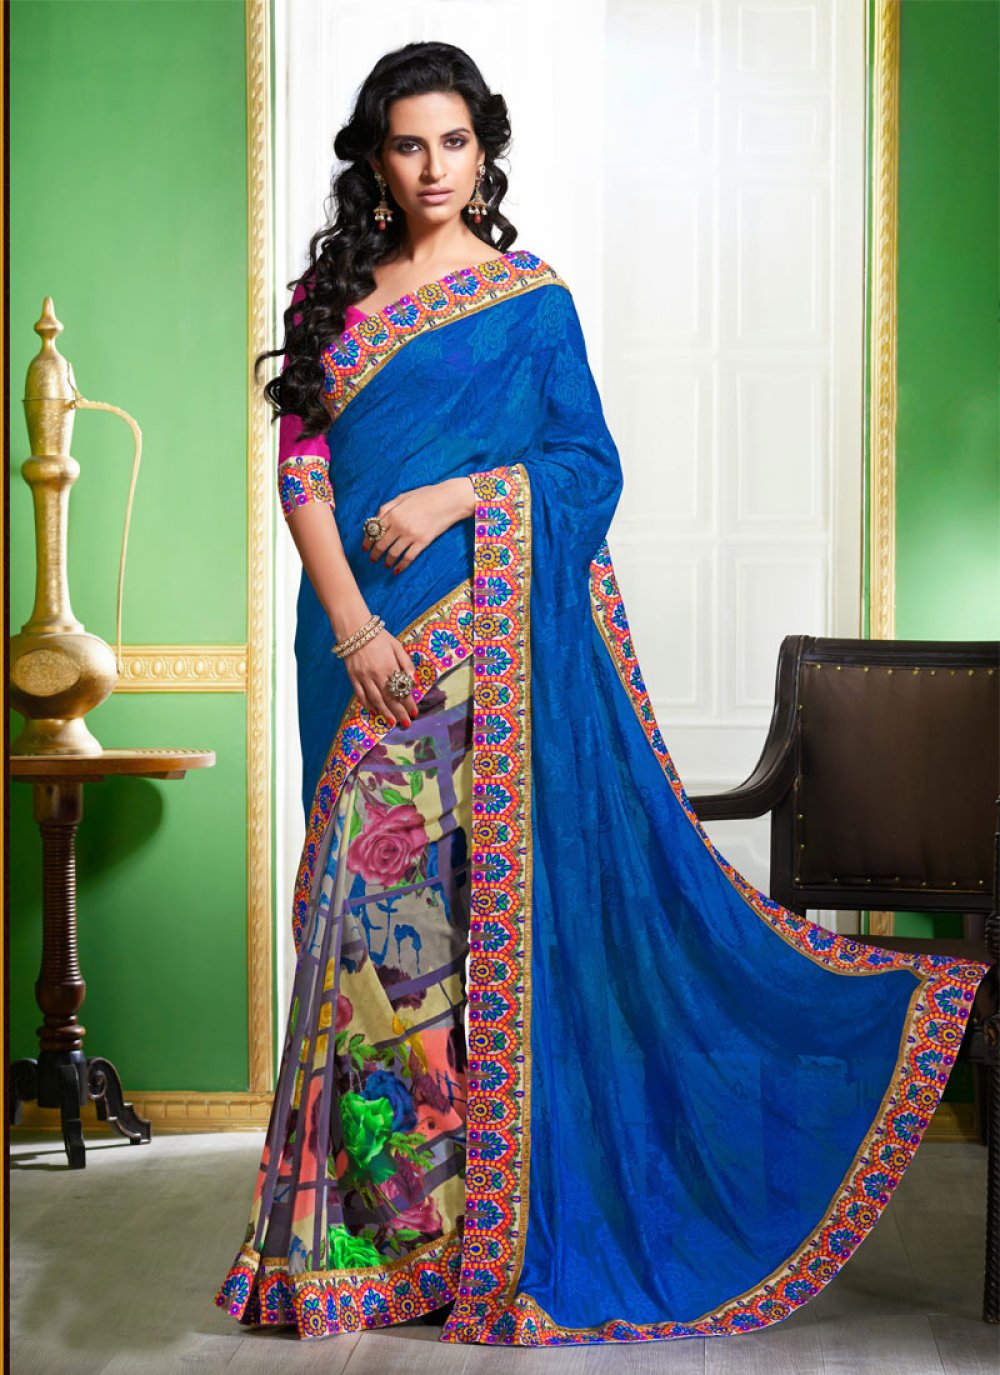 10 Splendid Designs of Lace Sarees for Trending Look